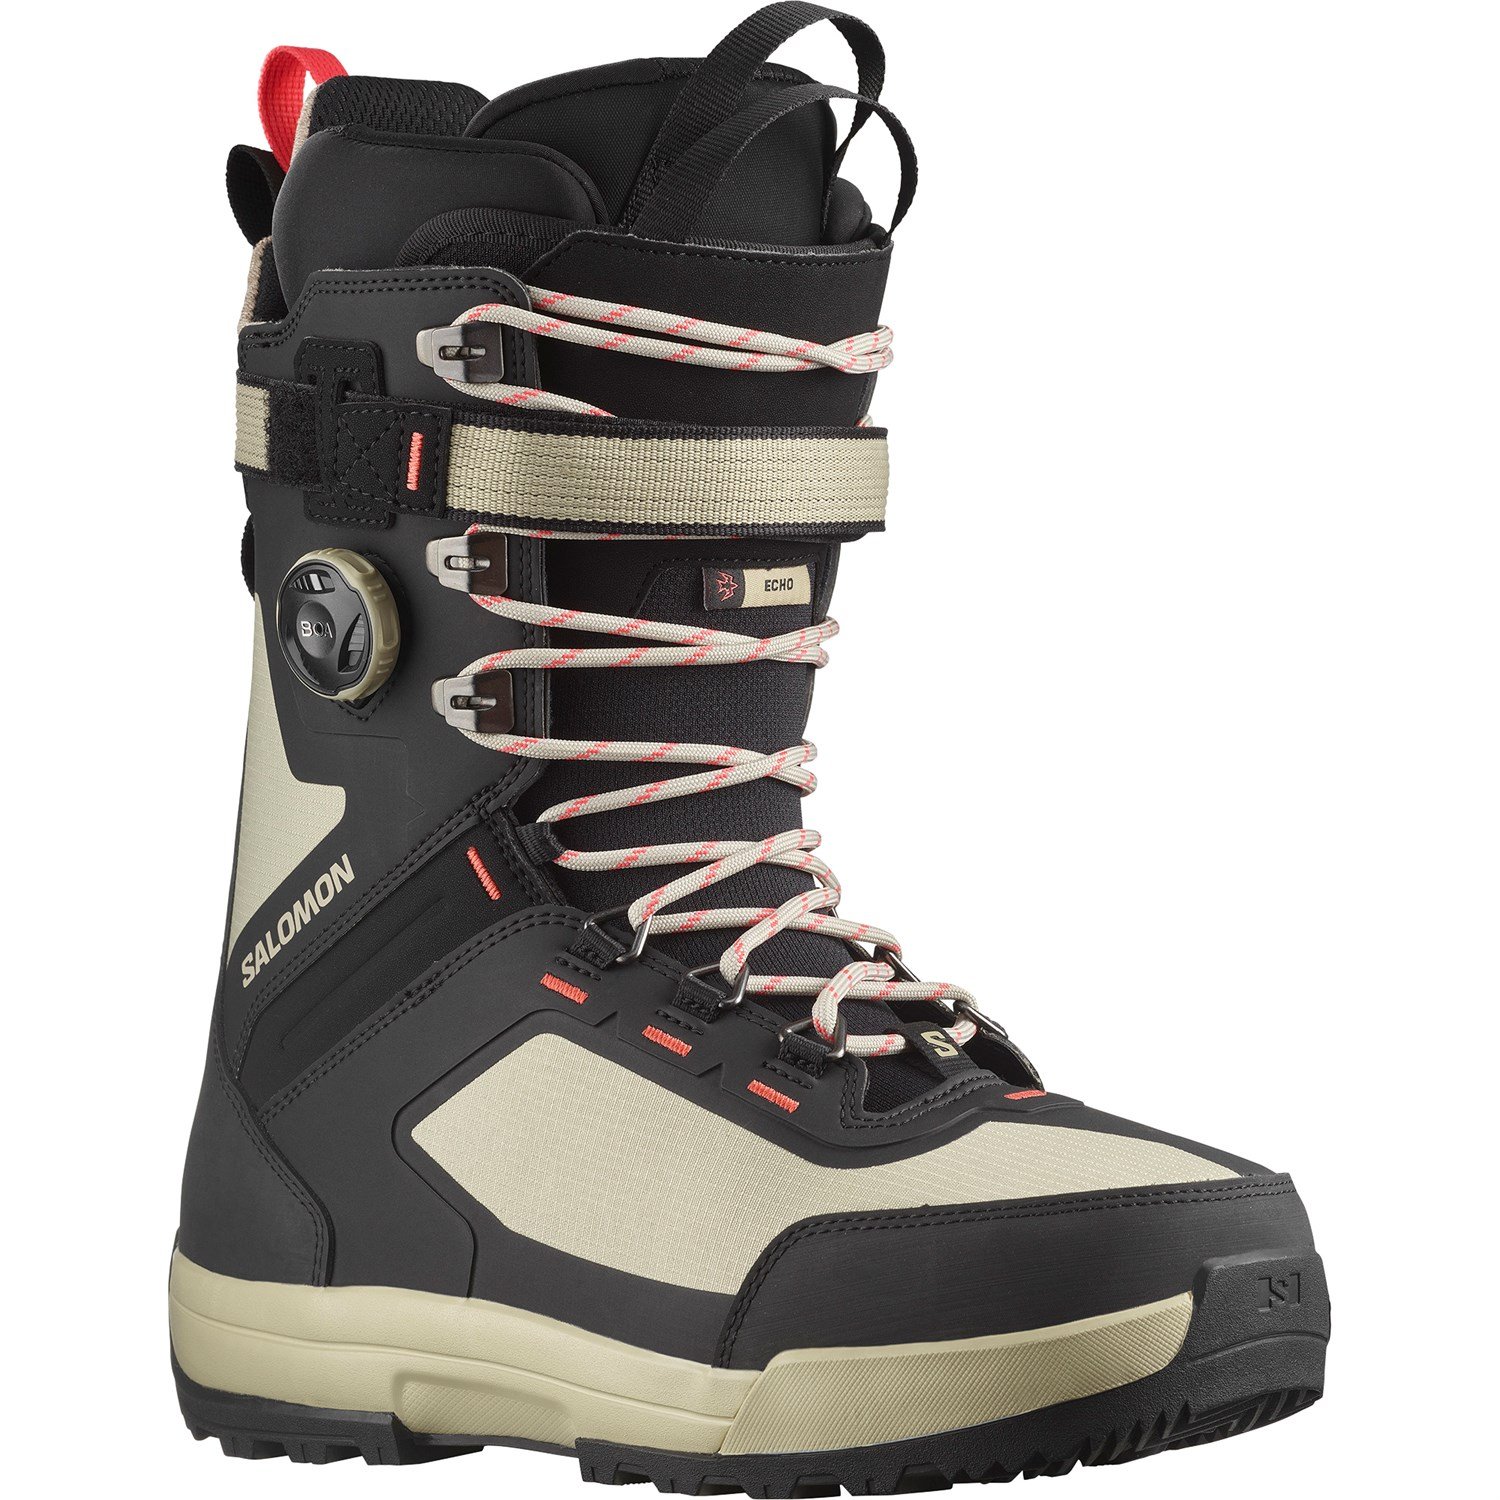 Snowboard Boot Lacing: Boa, Speed Laces & Traditional Laces